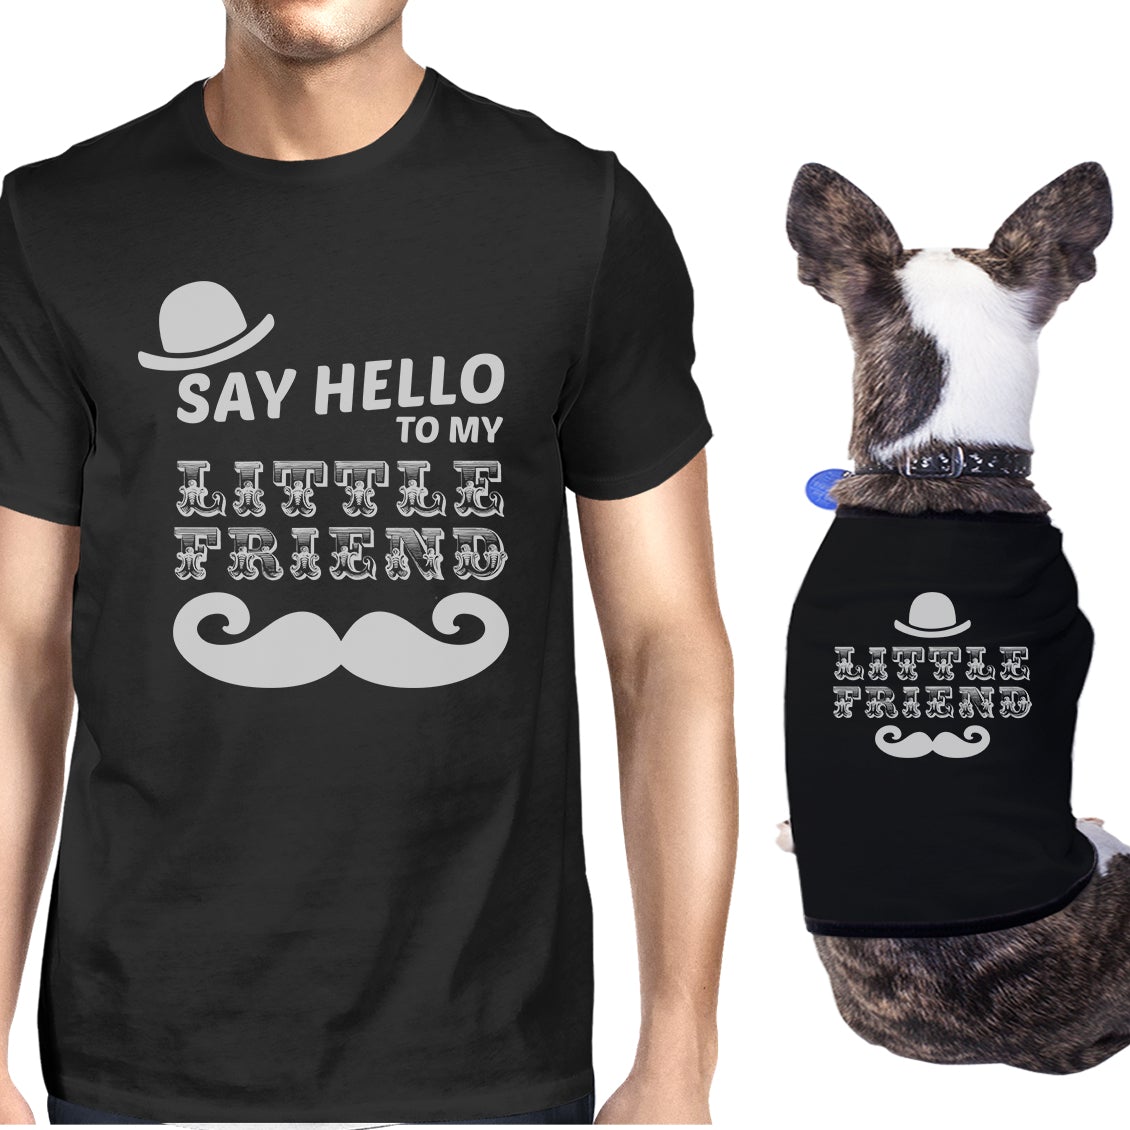 Say Hello To My Little Friend Mustache Owner and Pet Matching Black Shirts